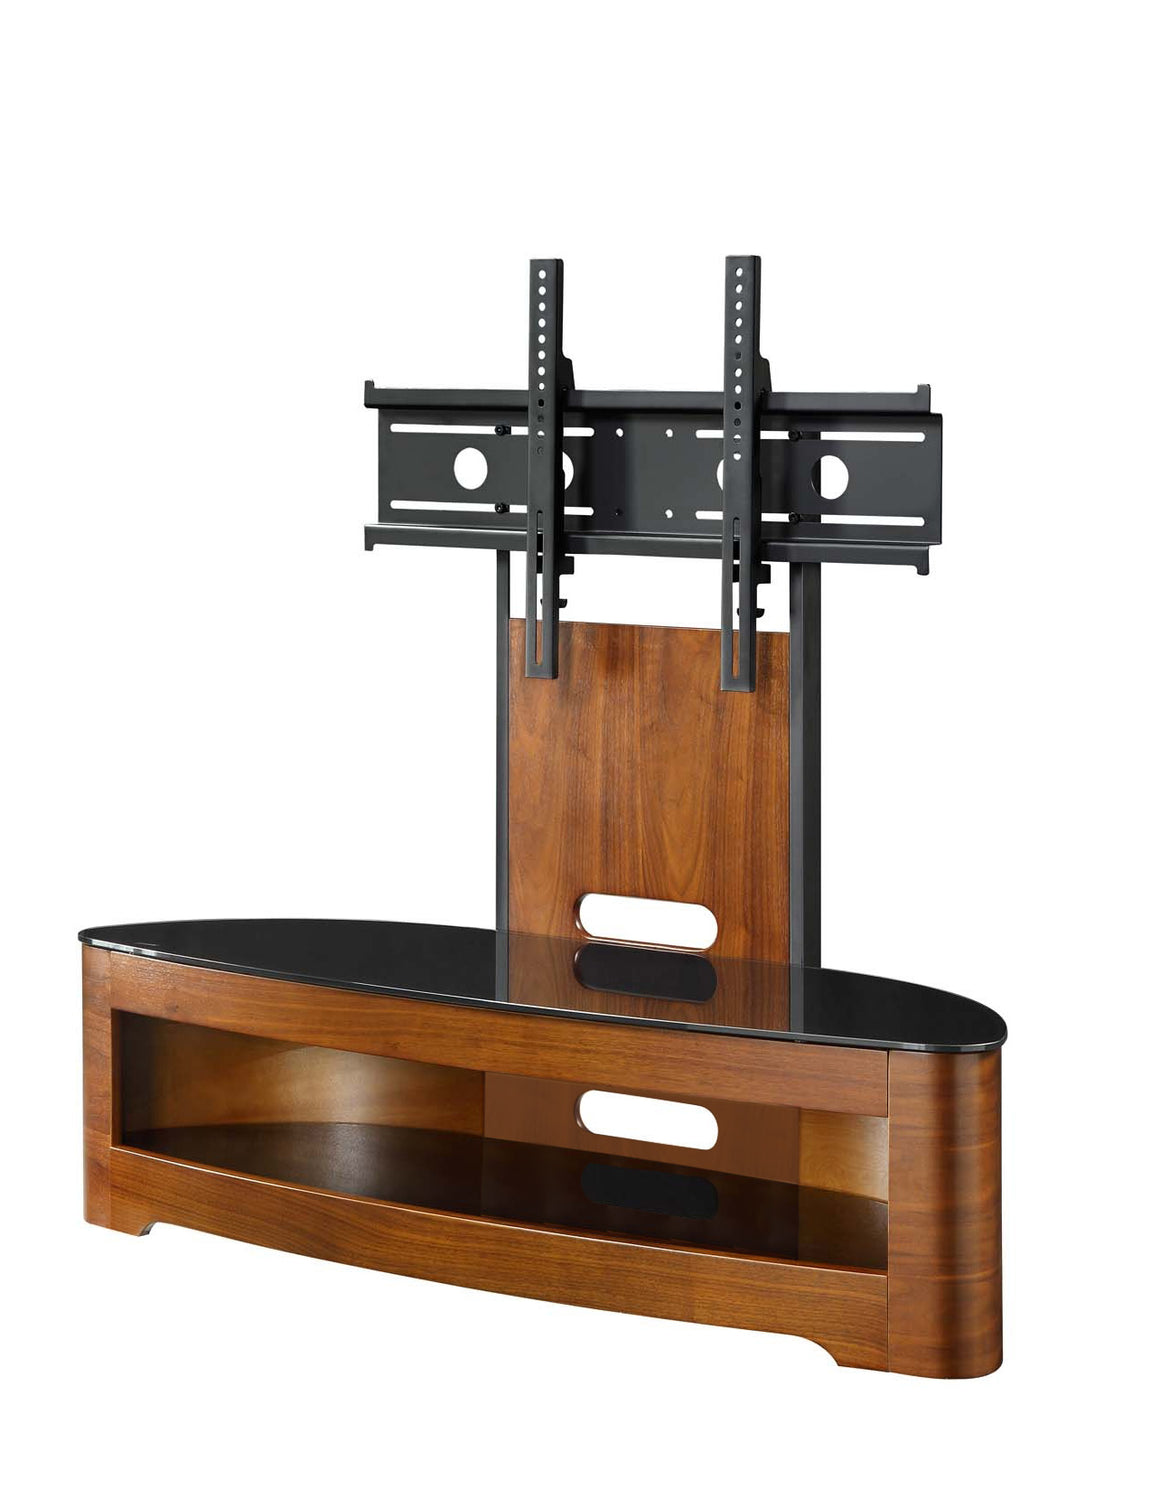 JF209 Florence Cantilever Stand (Walnut) - PRE ORDER FOR DELIVERY IN JUNE